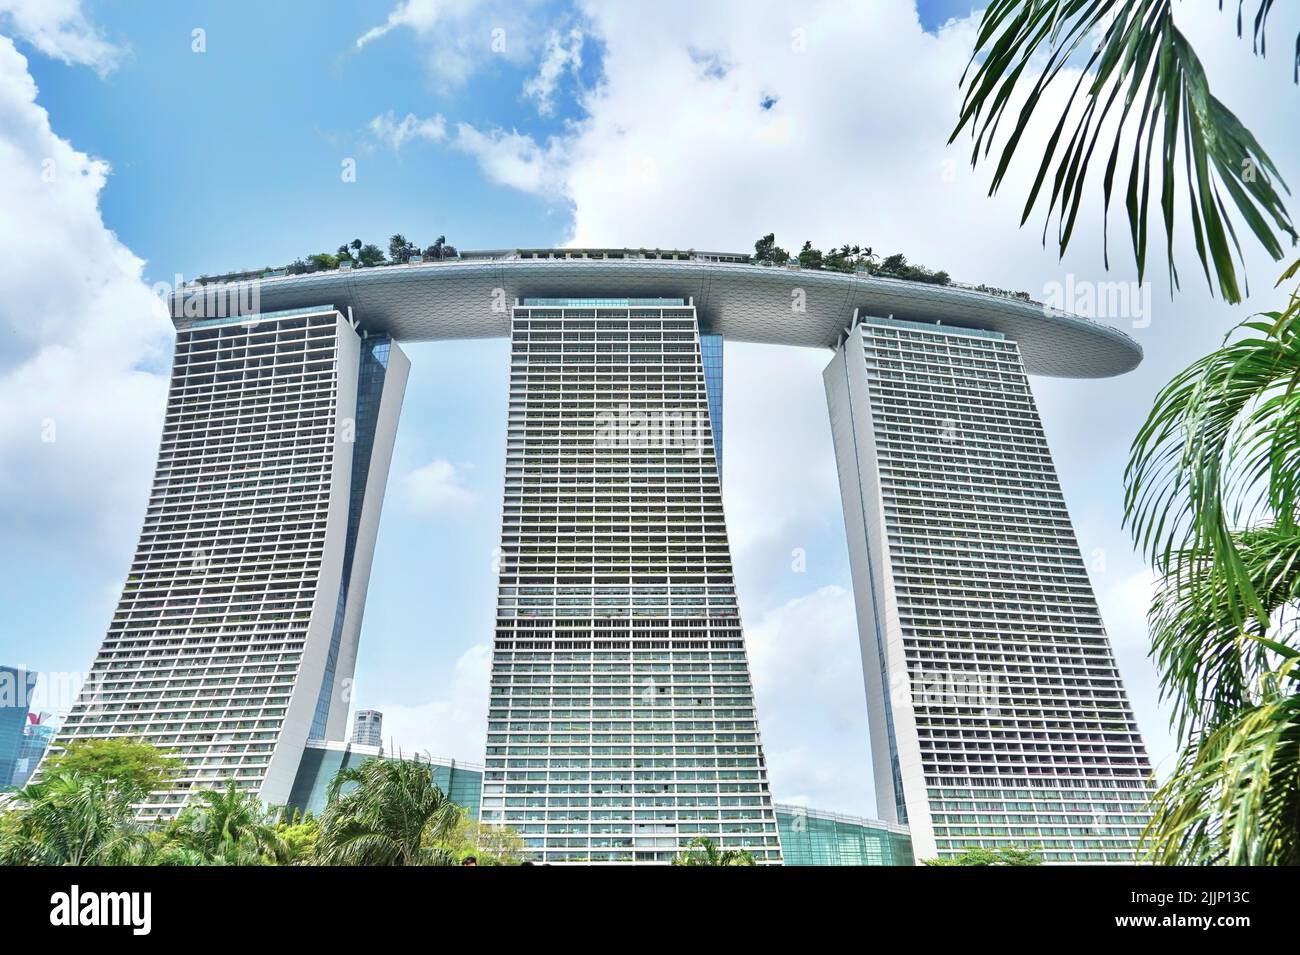 A low angle shot of the famous Marina Bay Sands hotel in Singapore under a bright cloudy summer sky Stock Photo